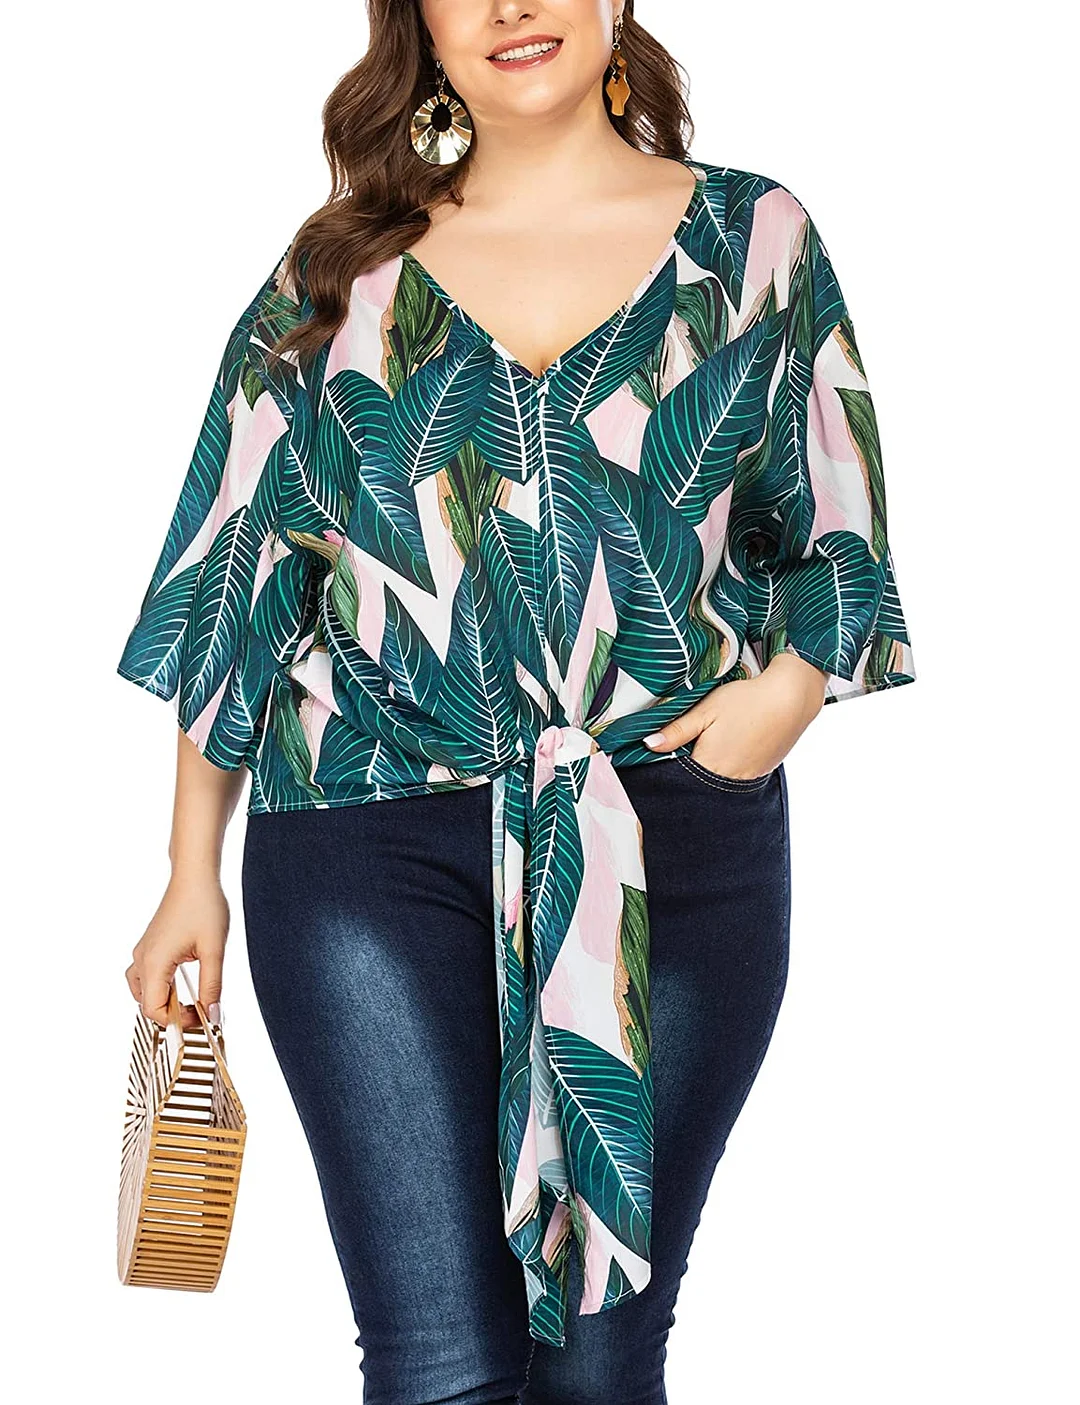 Womens Plus Size Floral Blouse V Neck Short Batwing Sleeve Tie Front Shirts Loose Casual Chiffon Work Tops